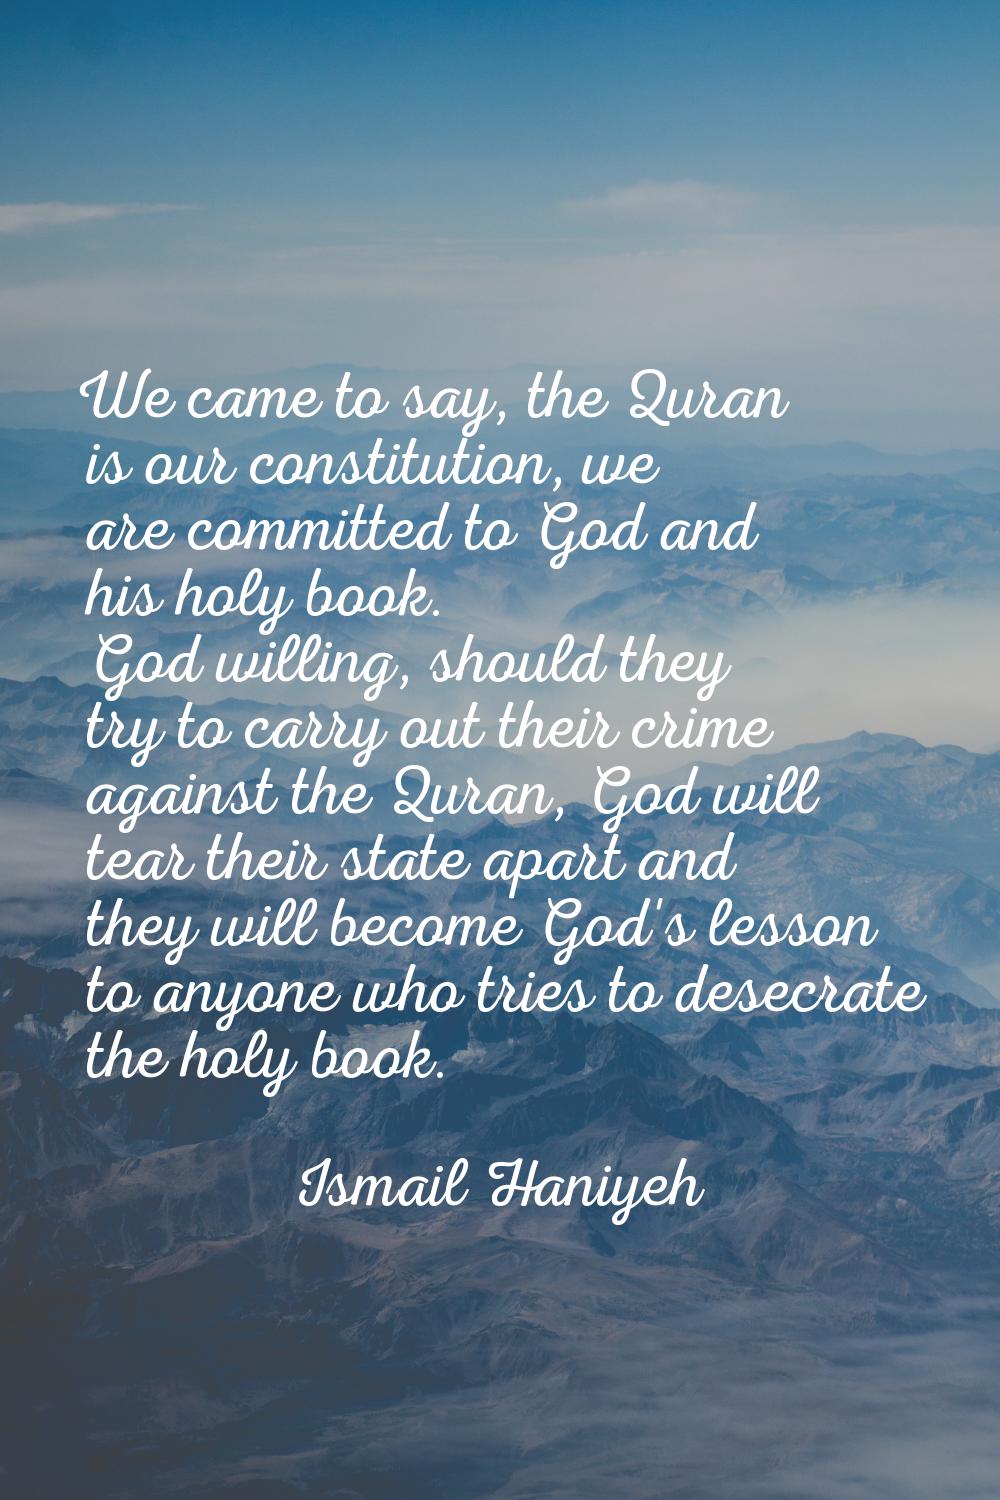 We came to say, the Quran is our constitution, we are committed to God and his holy book. God willi